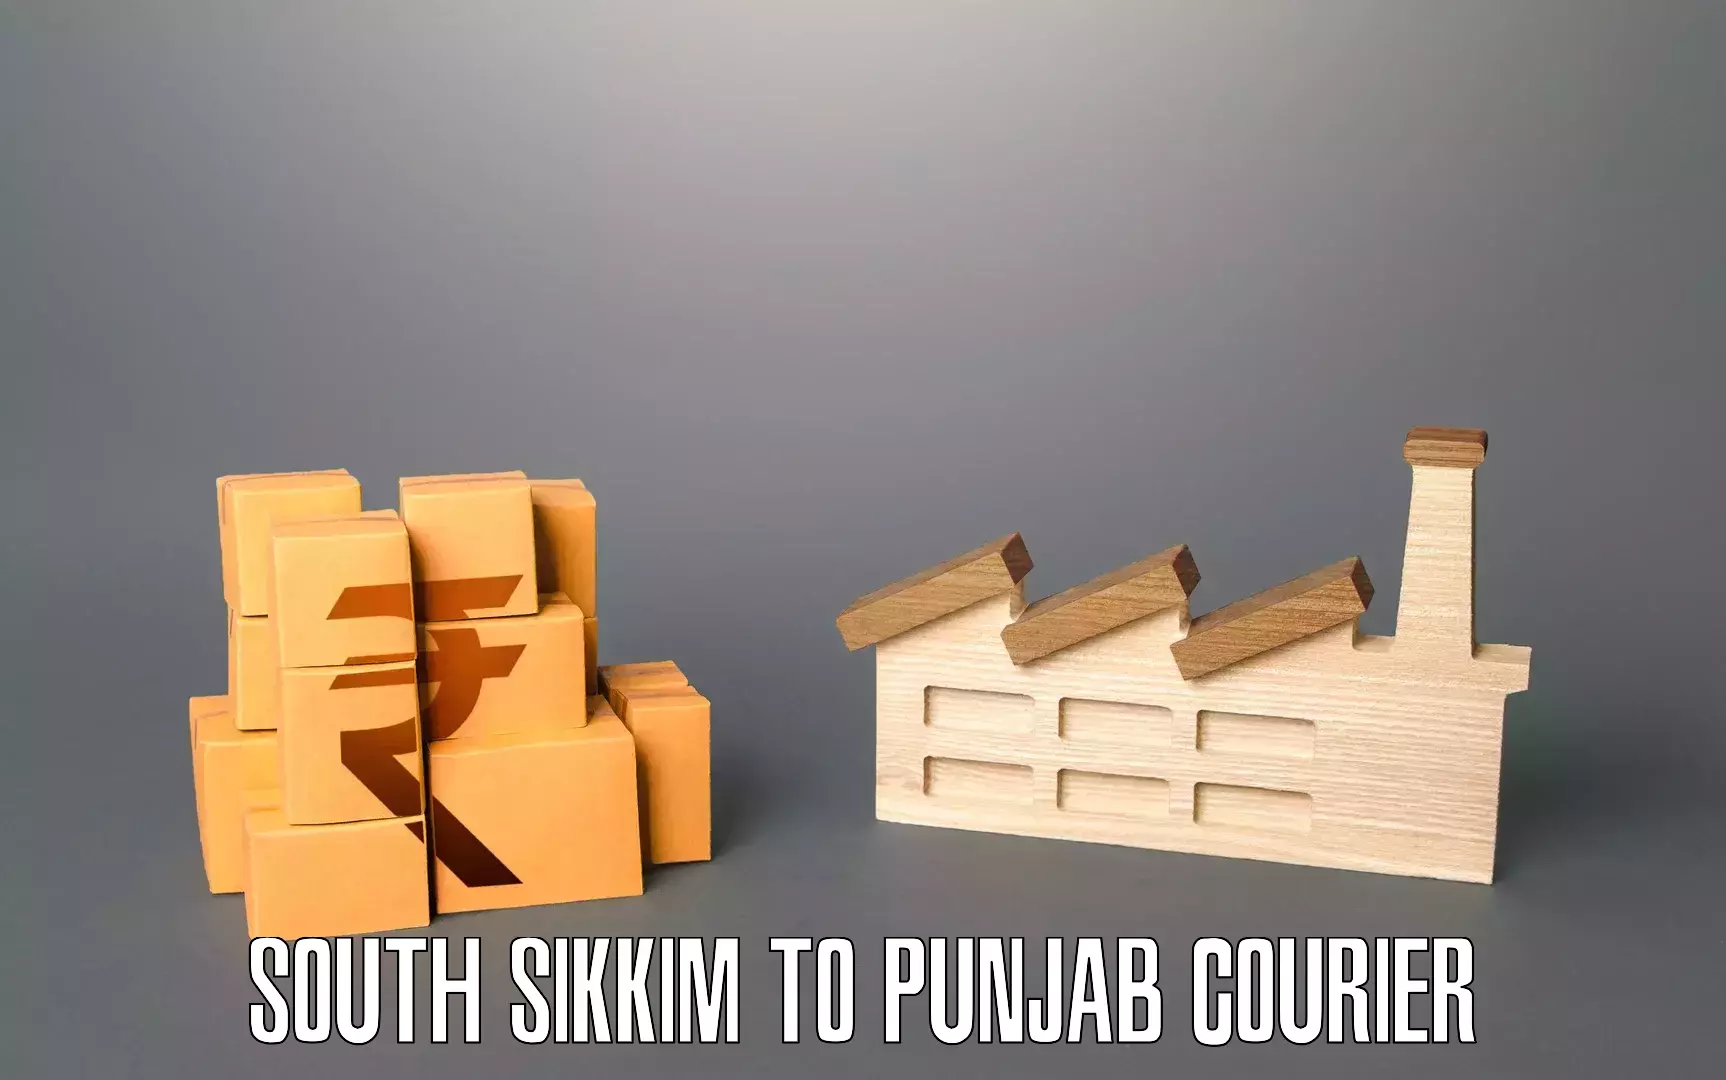 Reliable movers in South Sikkim to Punjab